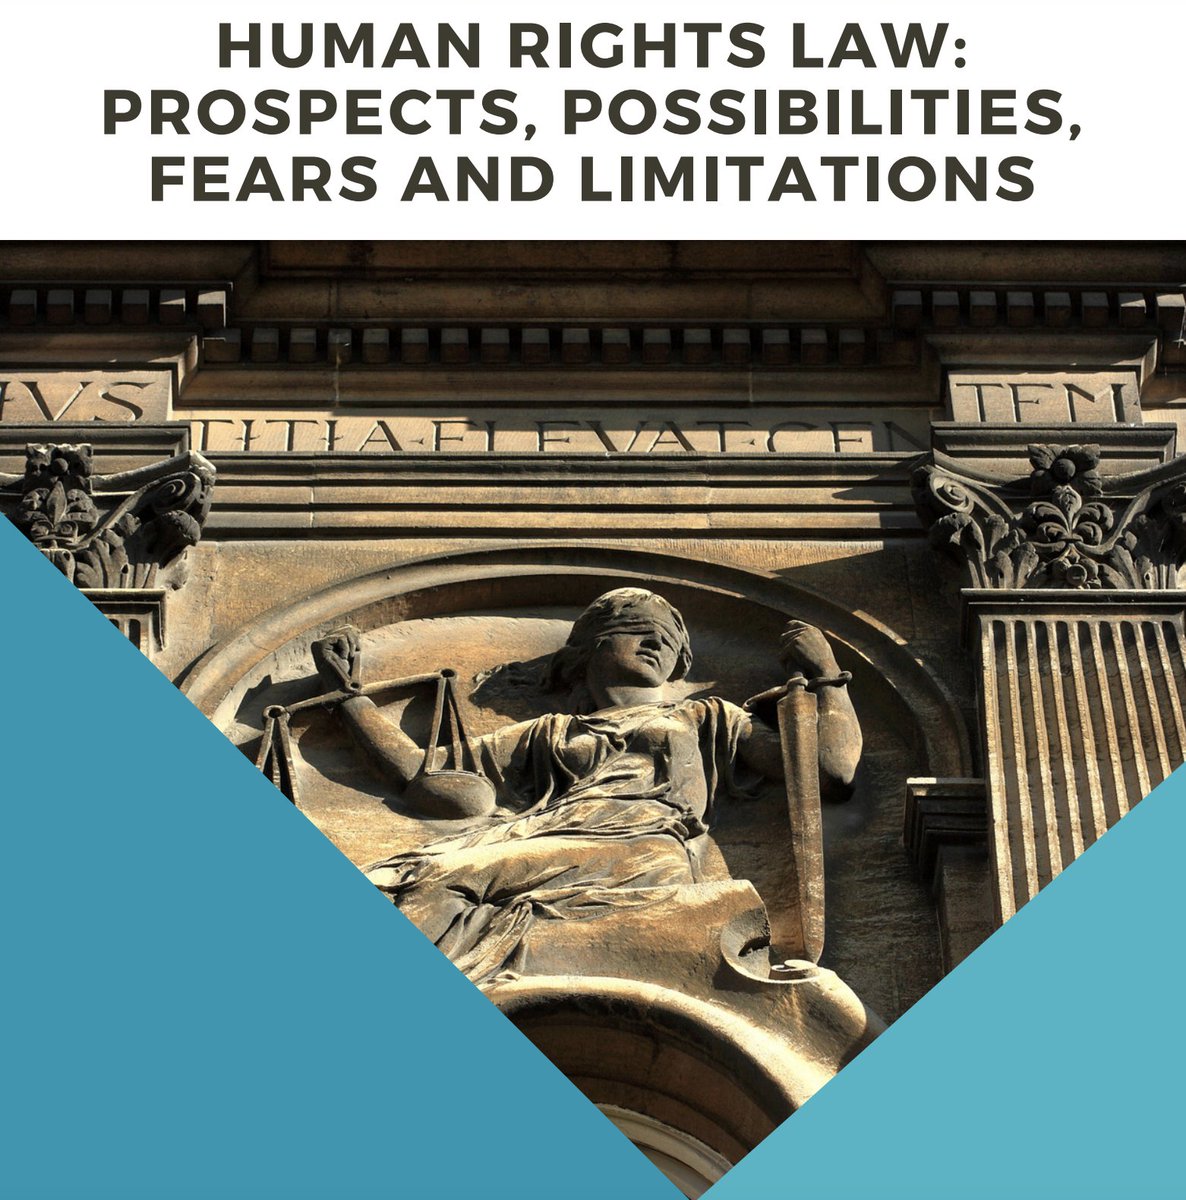 Great to see #ClimateLaw being discussed at the European Human Rights Law Conference 2023 today @EHRLC23. Sessions chaired by Martin Steinfeld on Climate Litigation & on Mitigation Full programme: bit.ly/3ZD96WI @cambridgelaw@Hughes_Hall @mwgehring